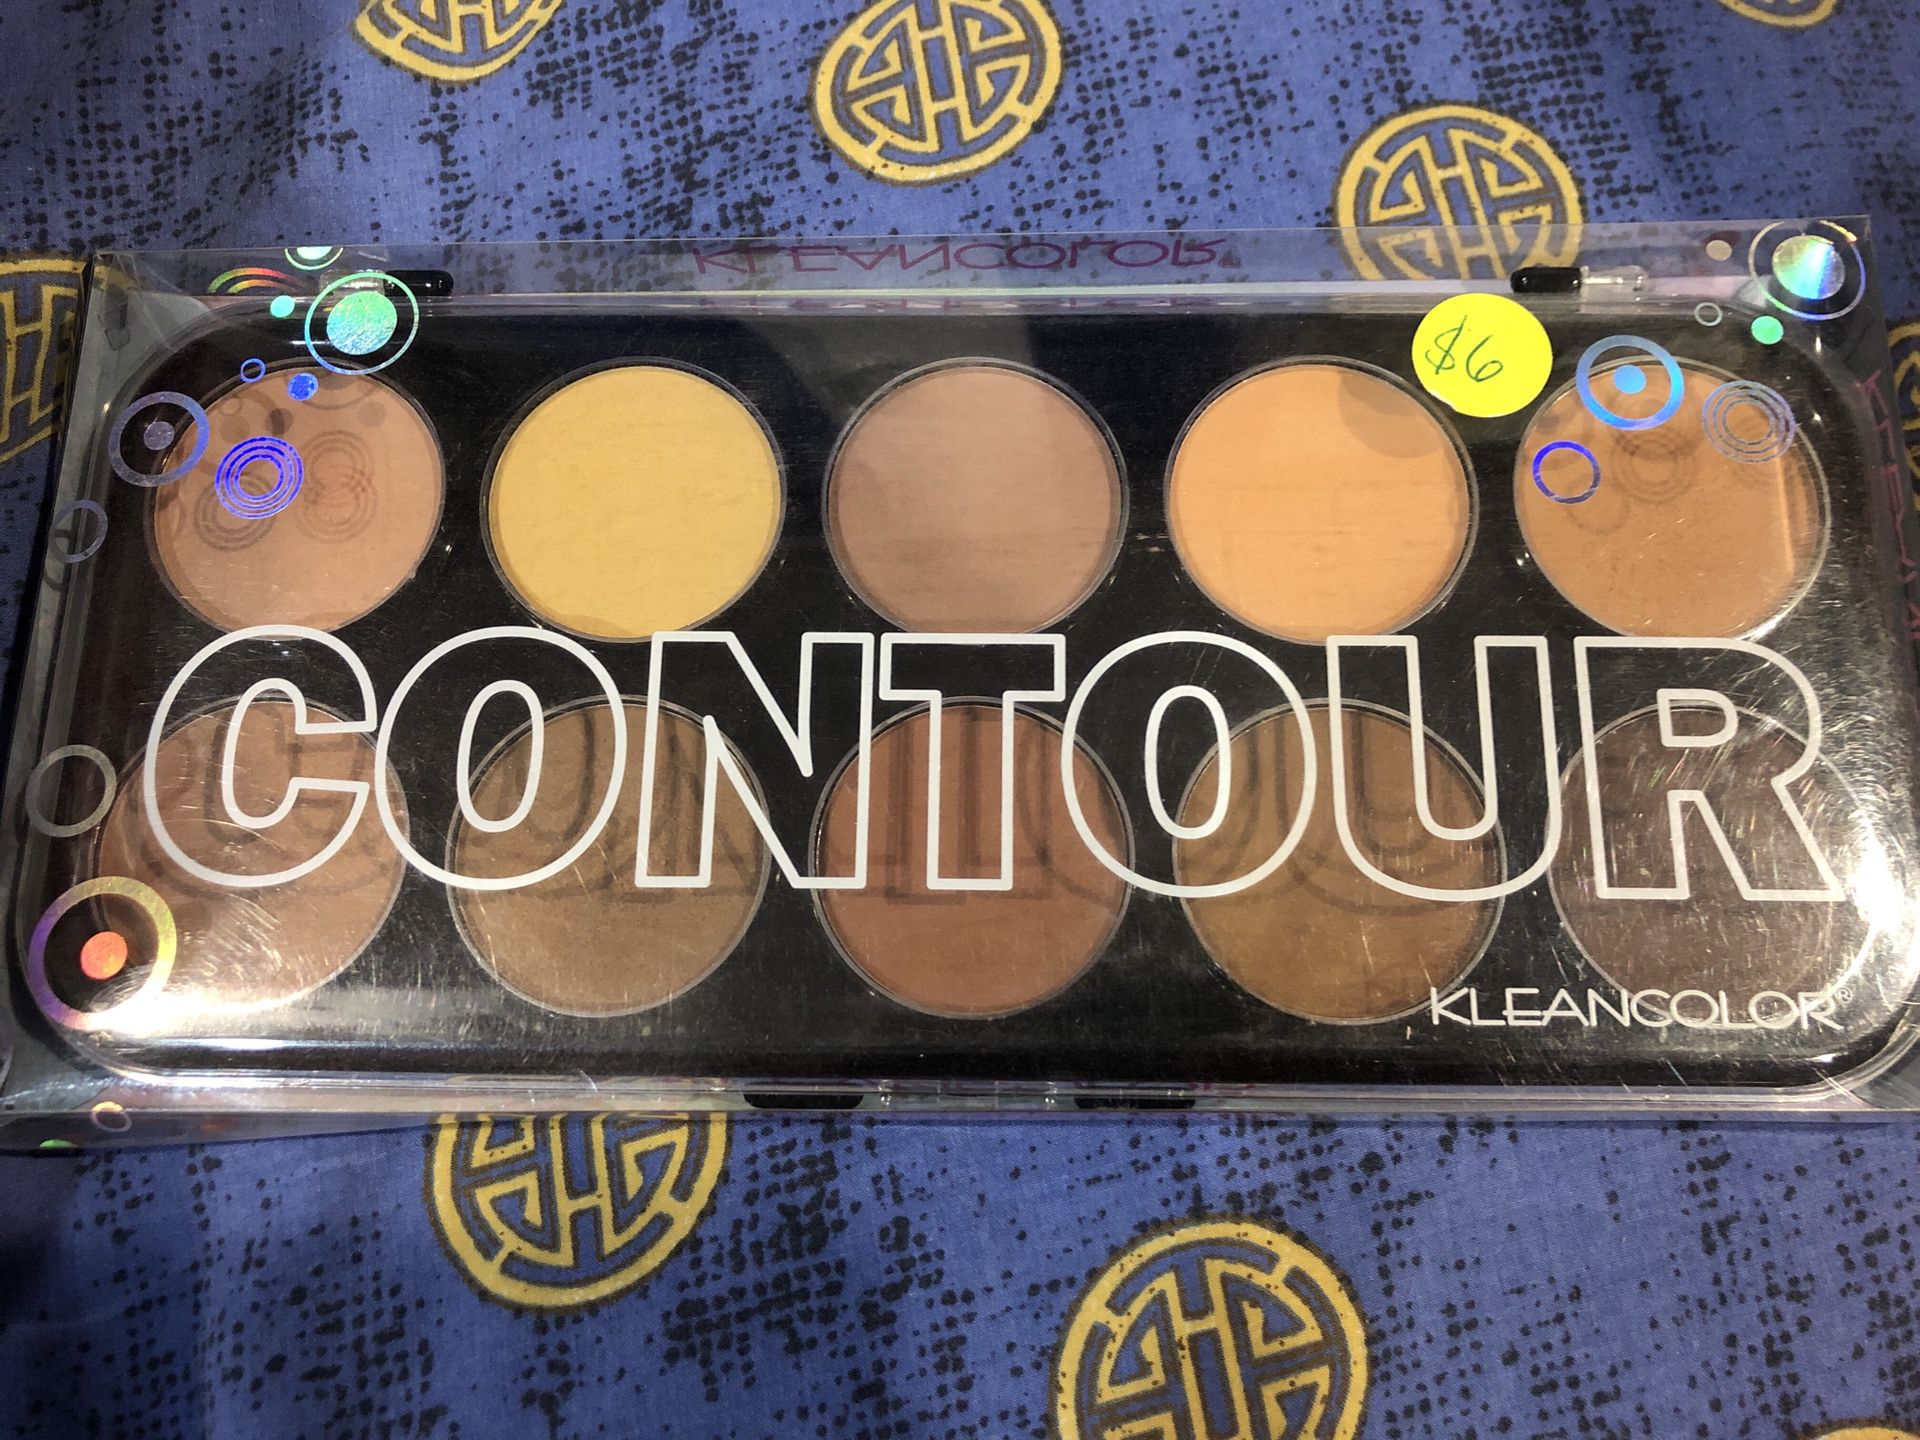 Makeup on the brushing of contour